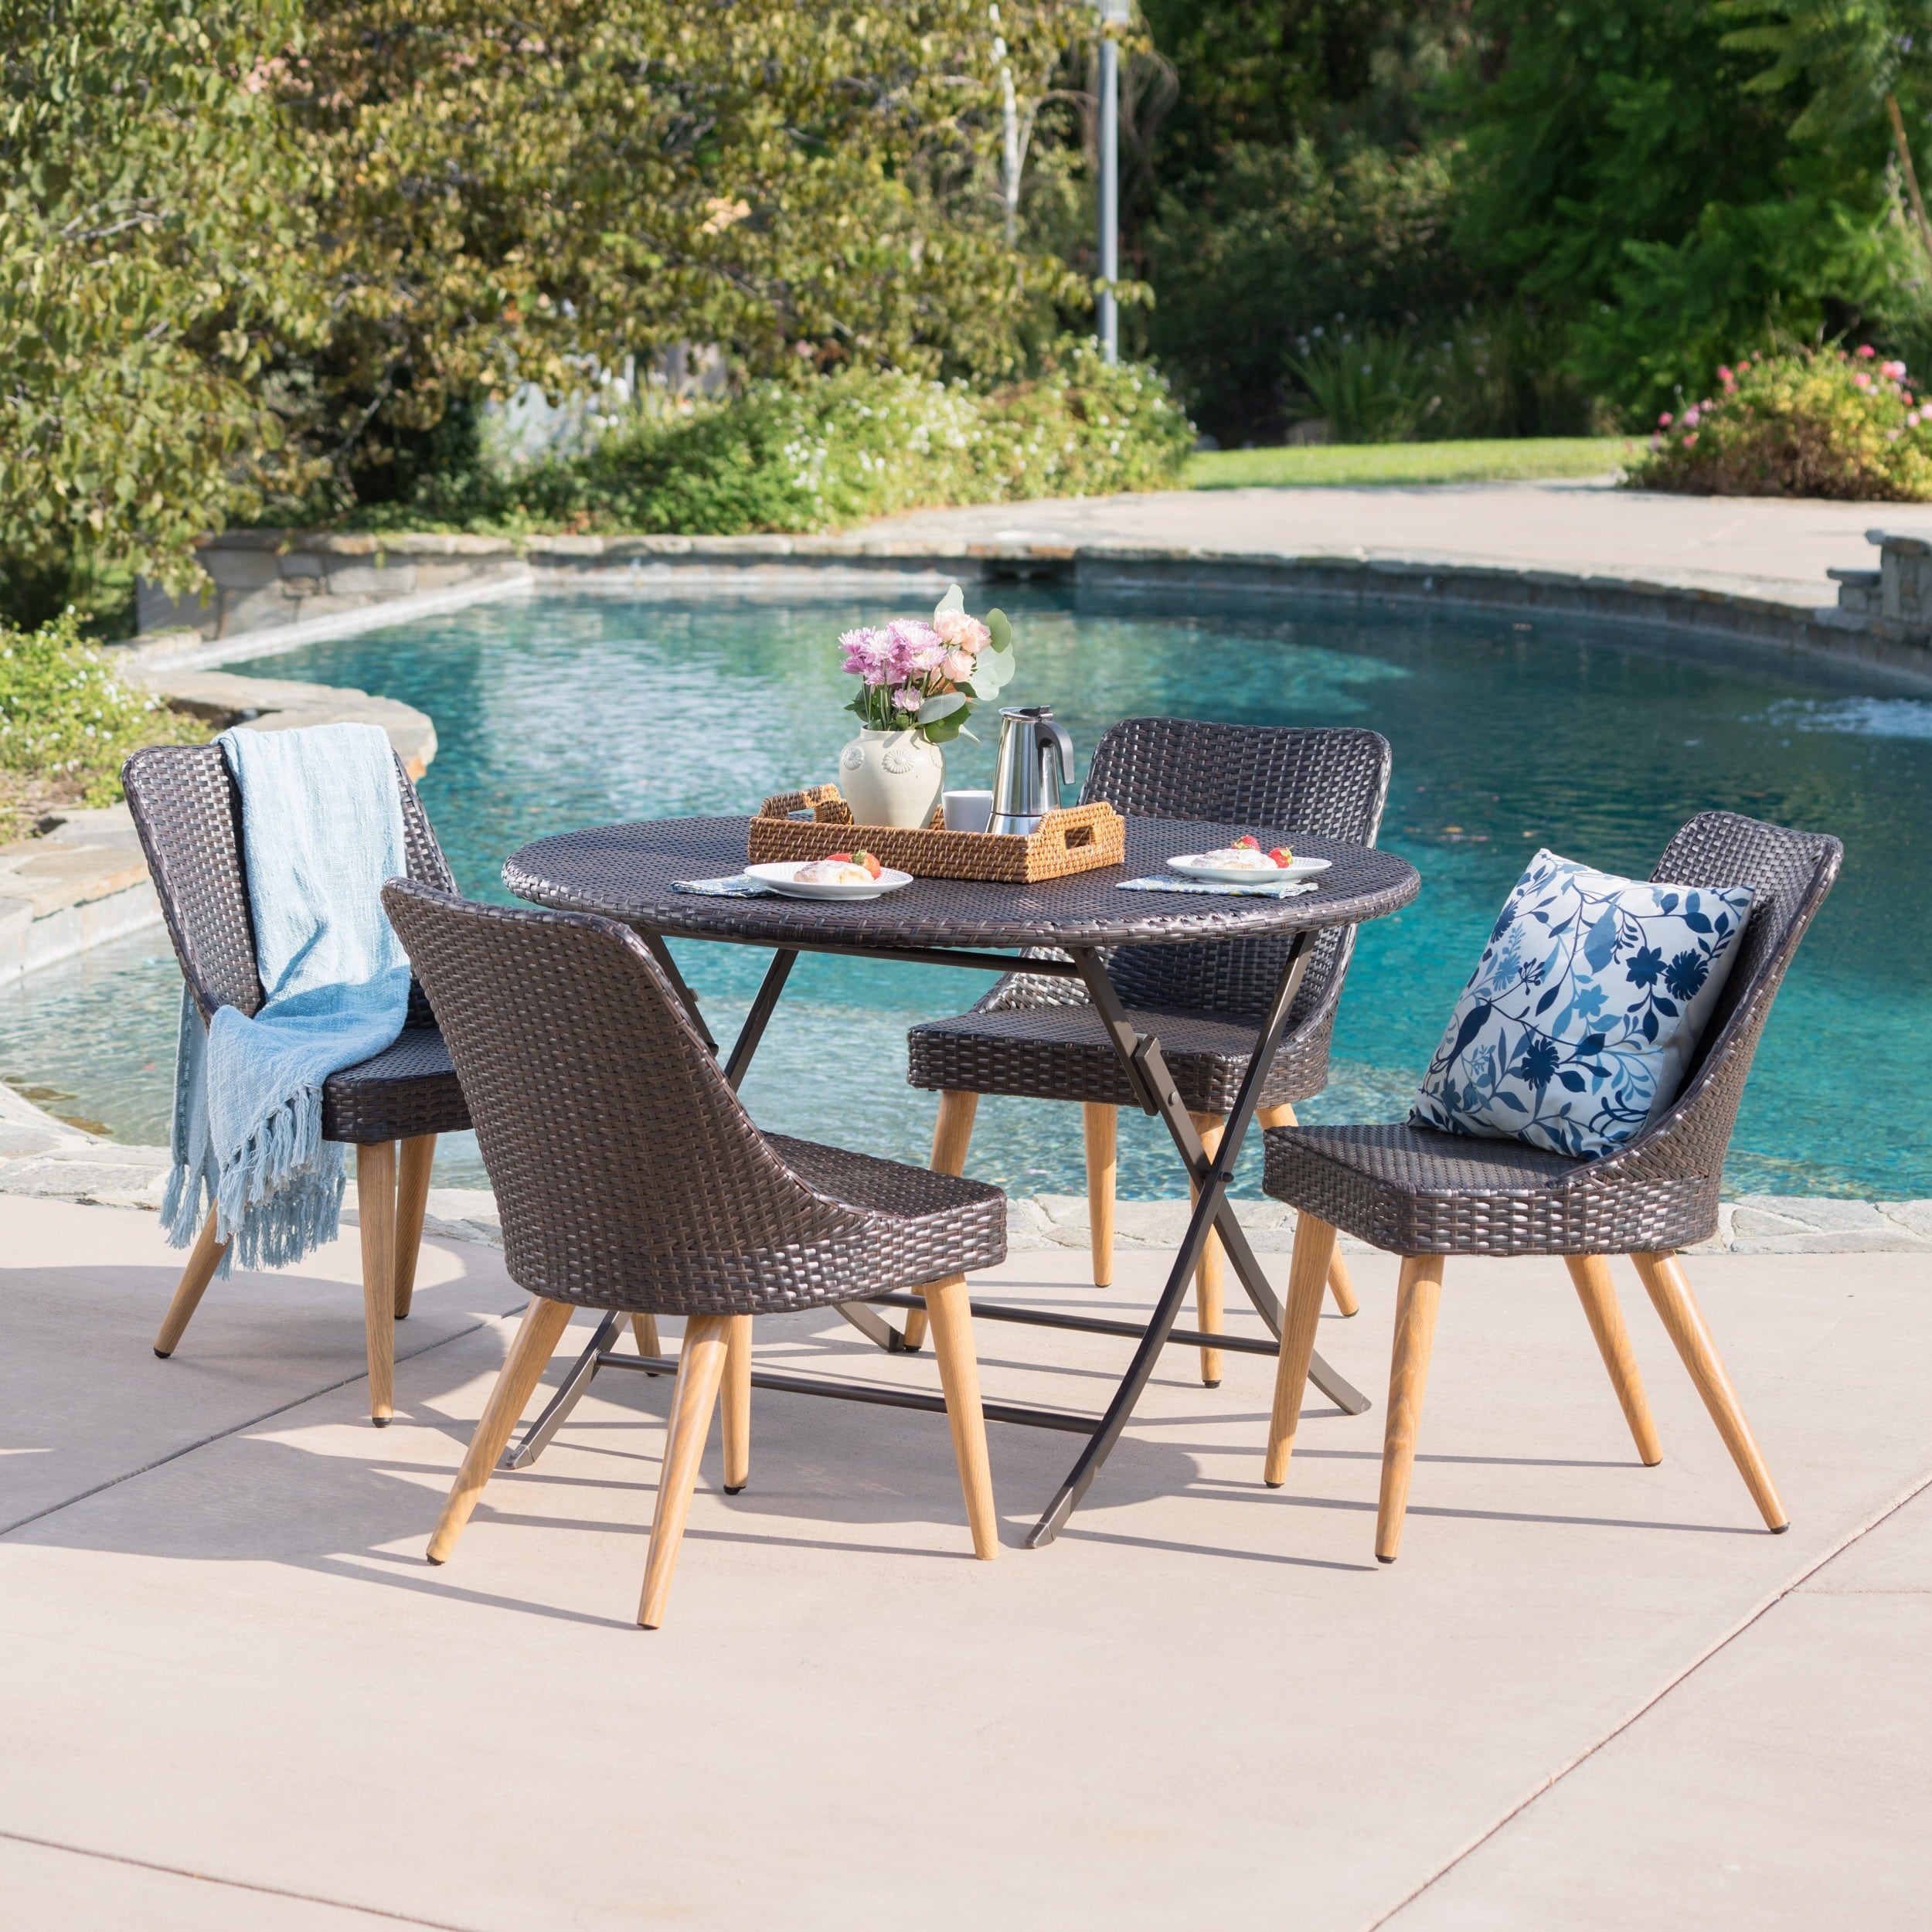 Opal Outdoor 5-piece Round Foldable Wicker Dining Set With Umbrella Hole By Christopher Knight Home